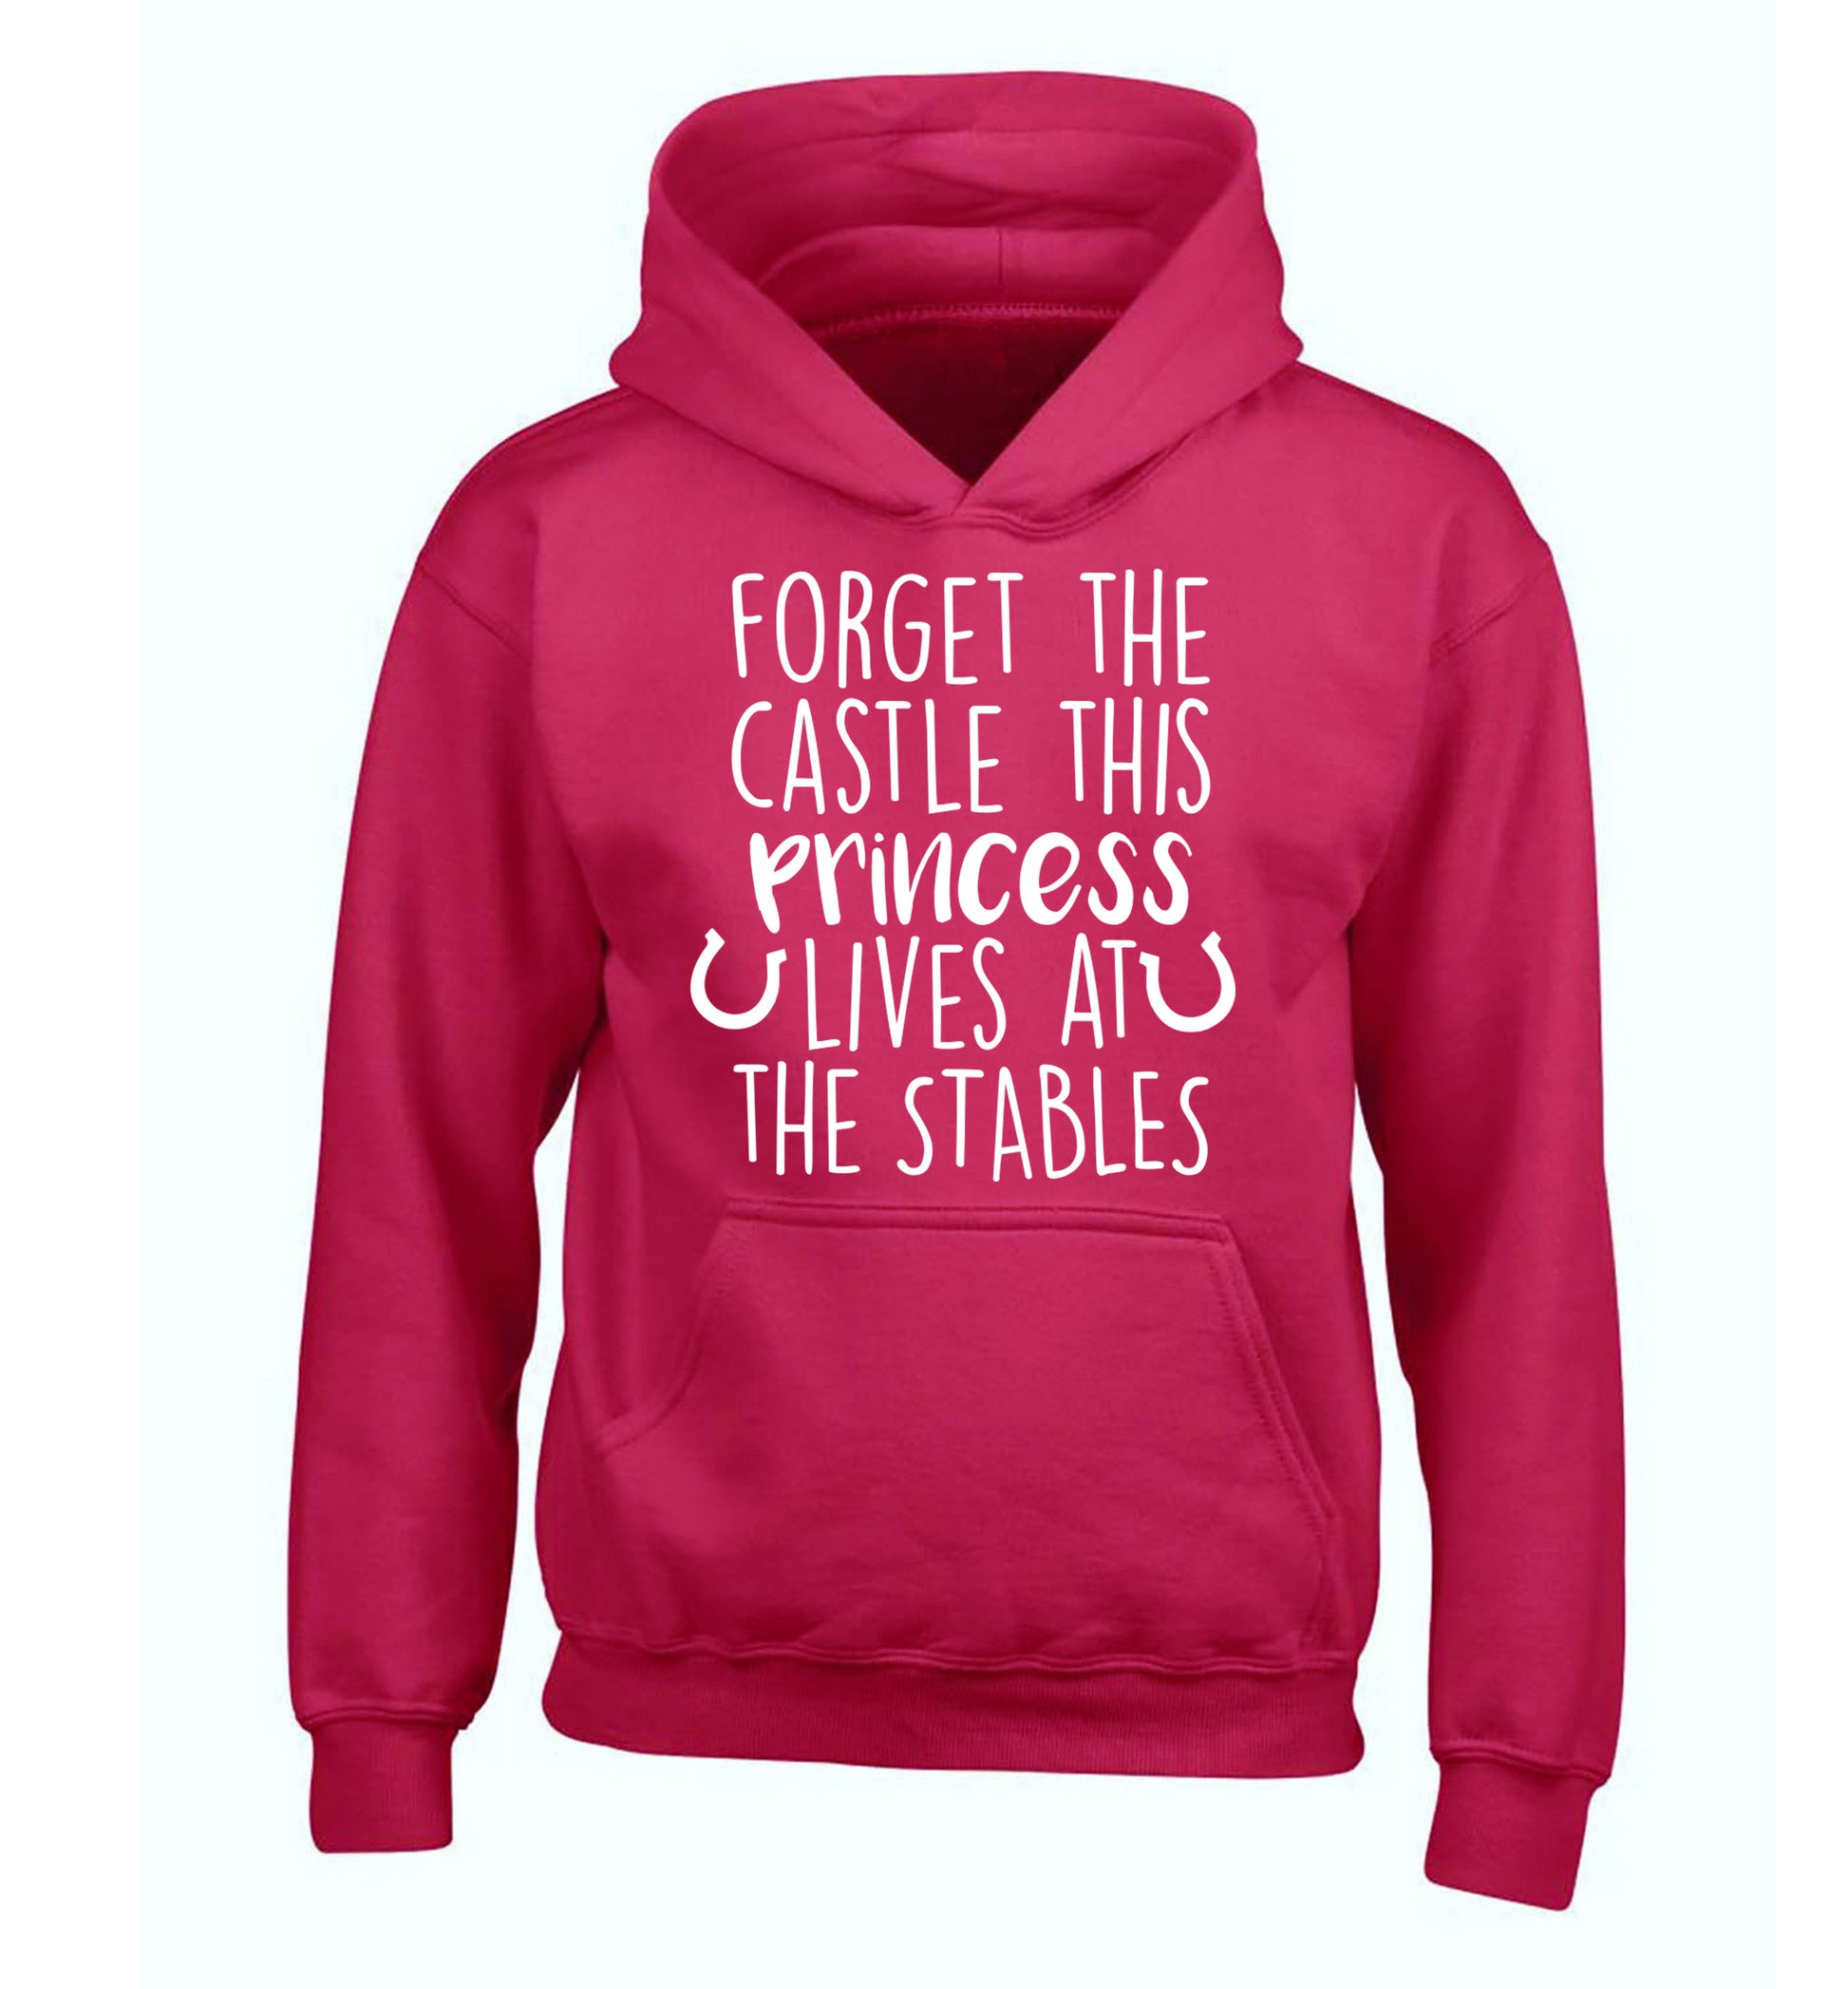 Forget the castle this princess lives at the stables children's pink hoodie 12-14 Years